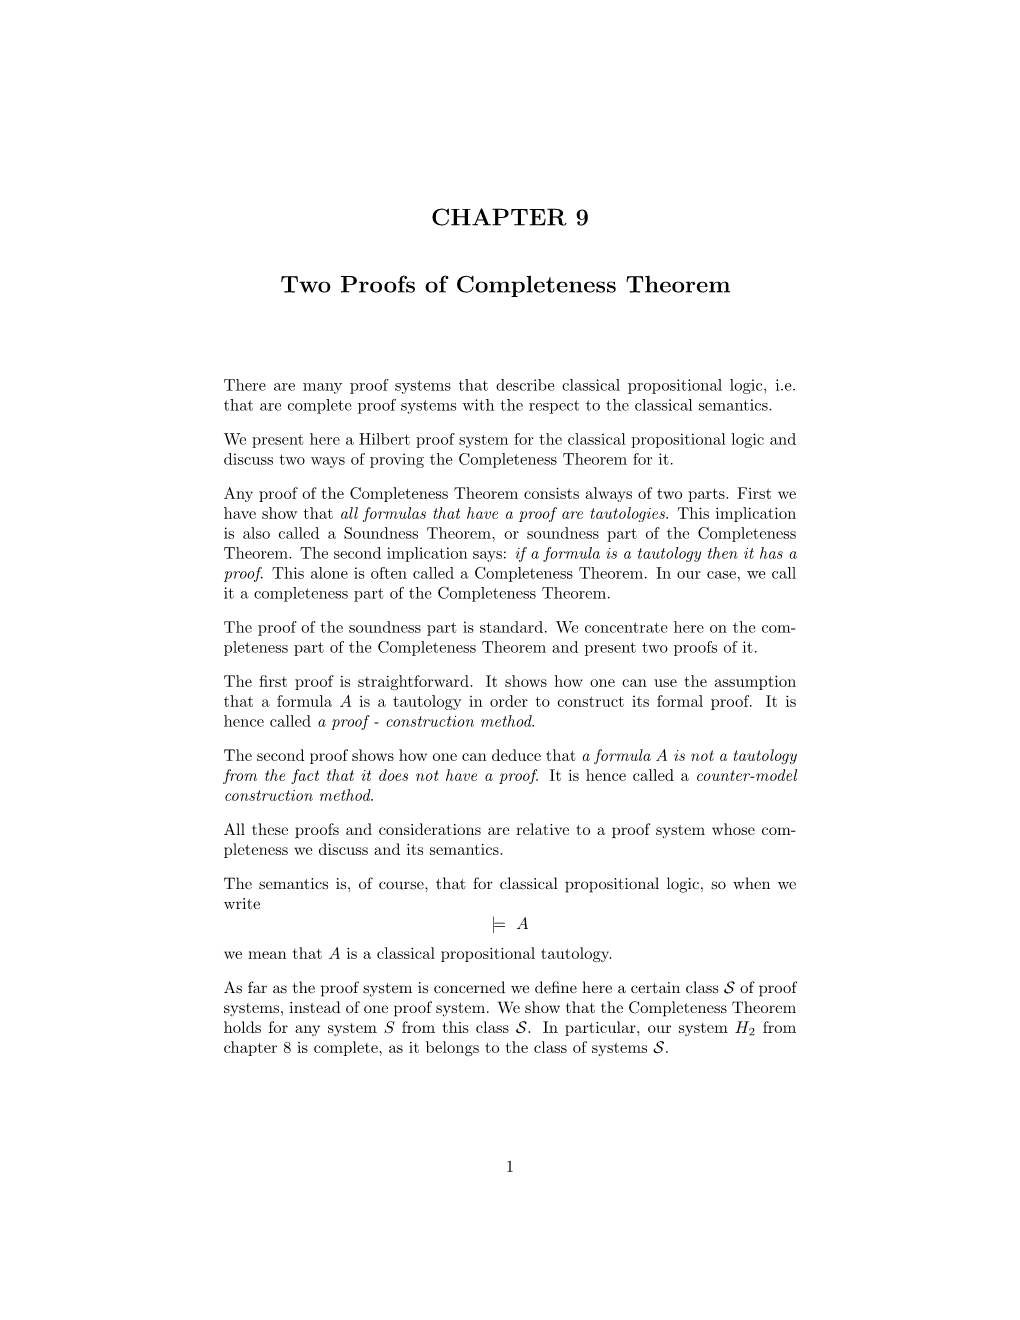 CHAPTER 9 Two Proofs of Completeness Theorem